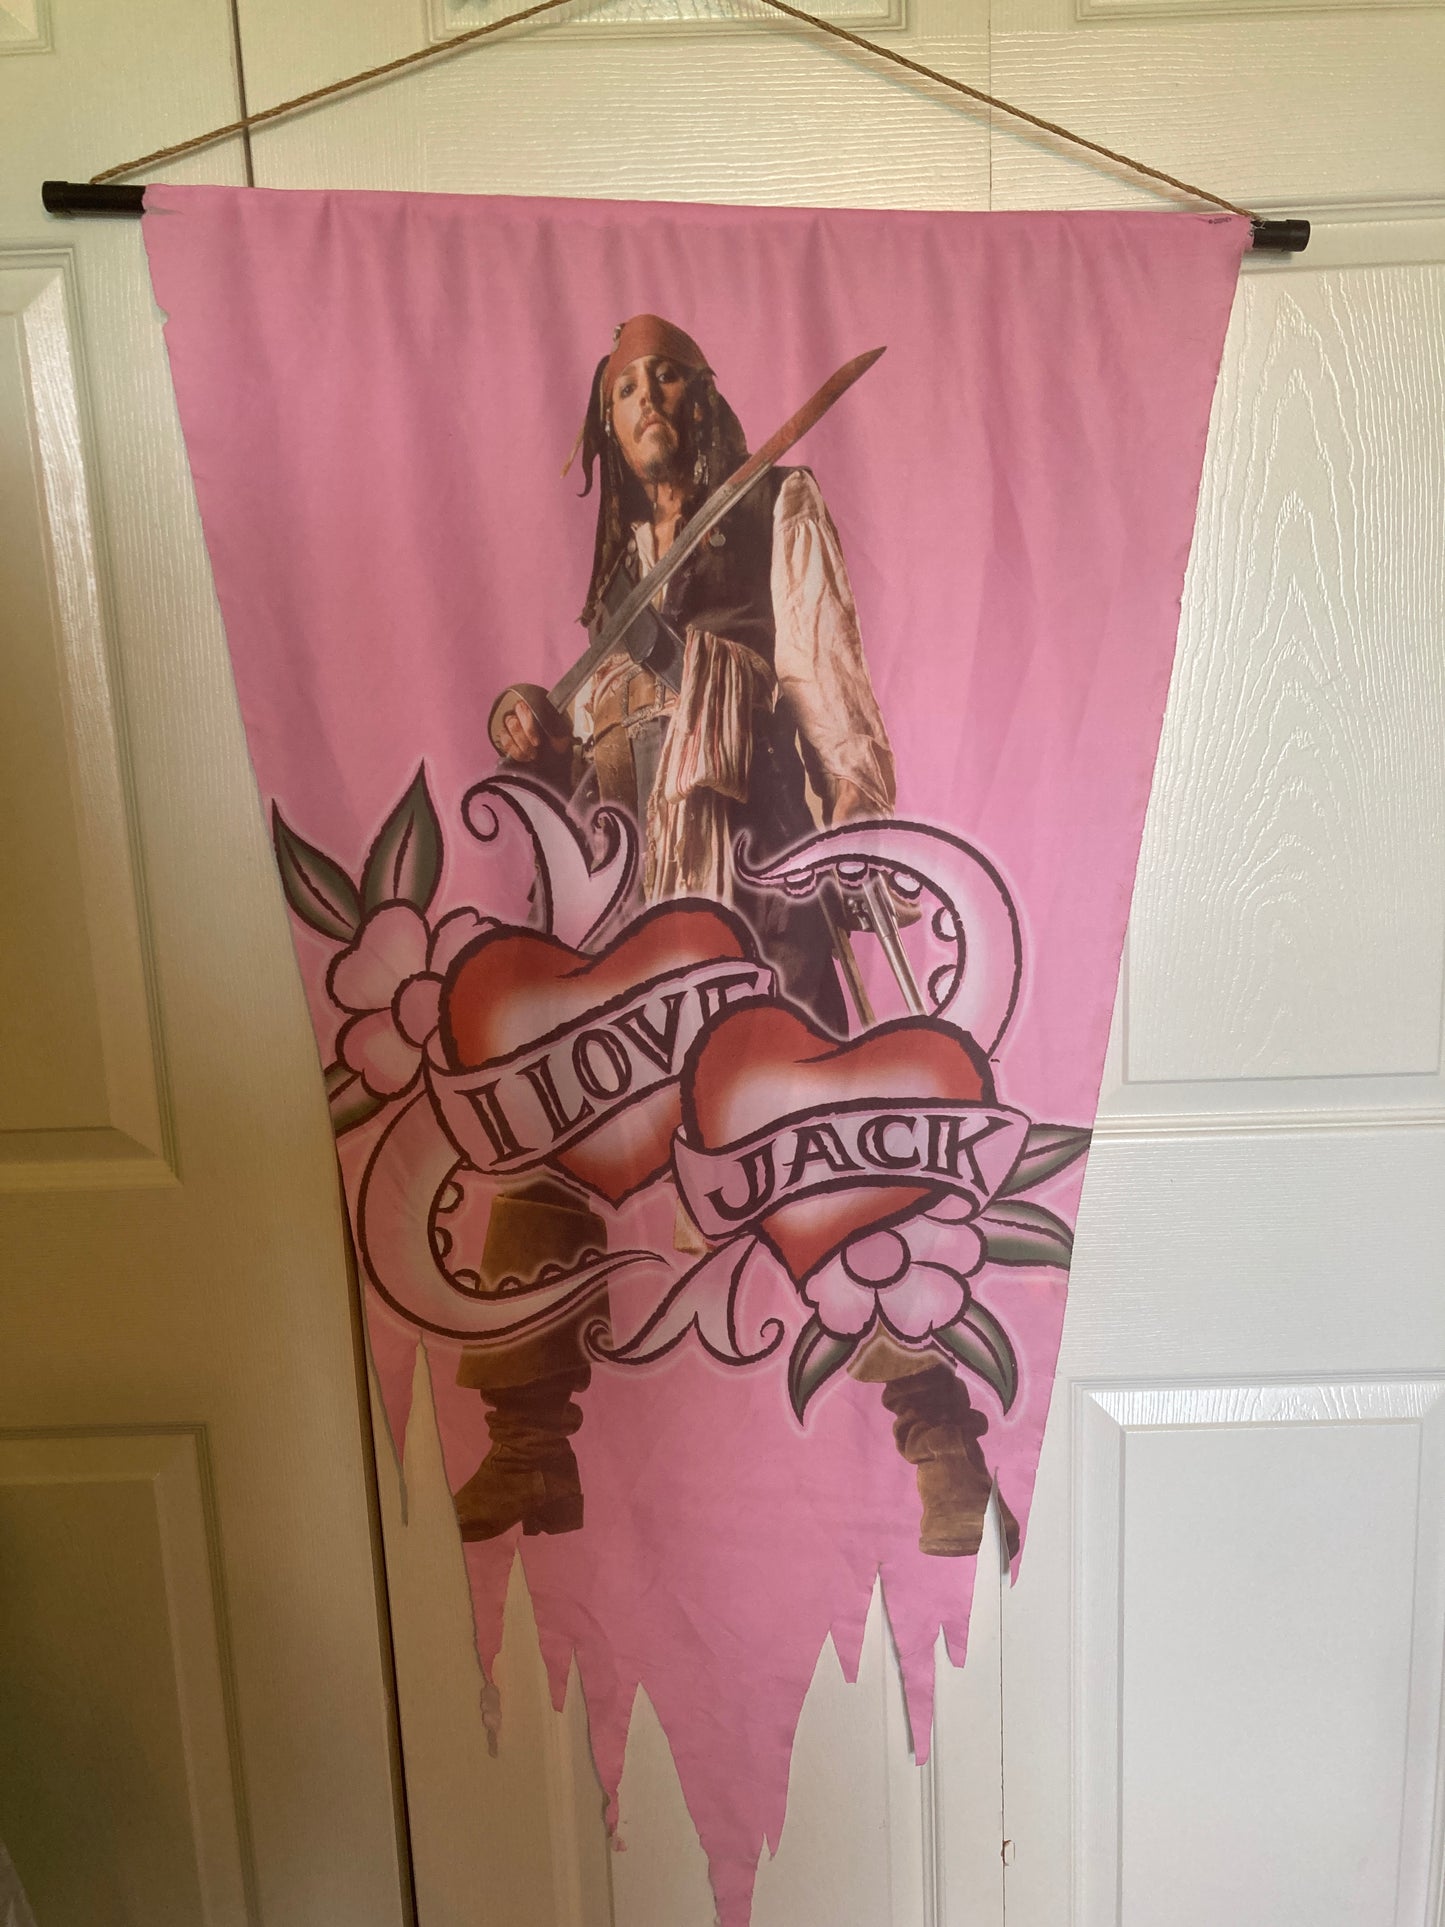 "I Love Jack" Pink Pirate Banner Flag, Pirates of the Caribbean, Johnny Depp